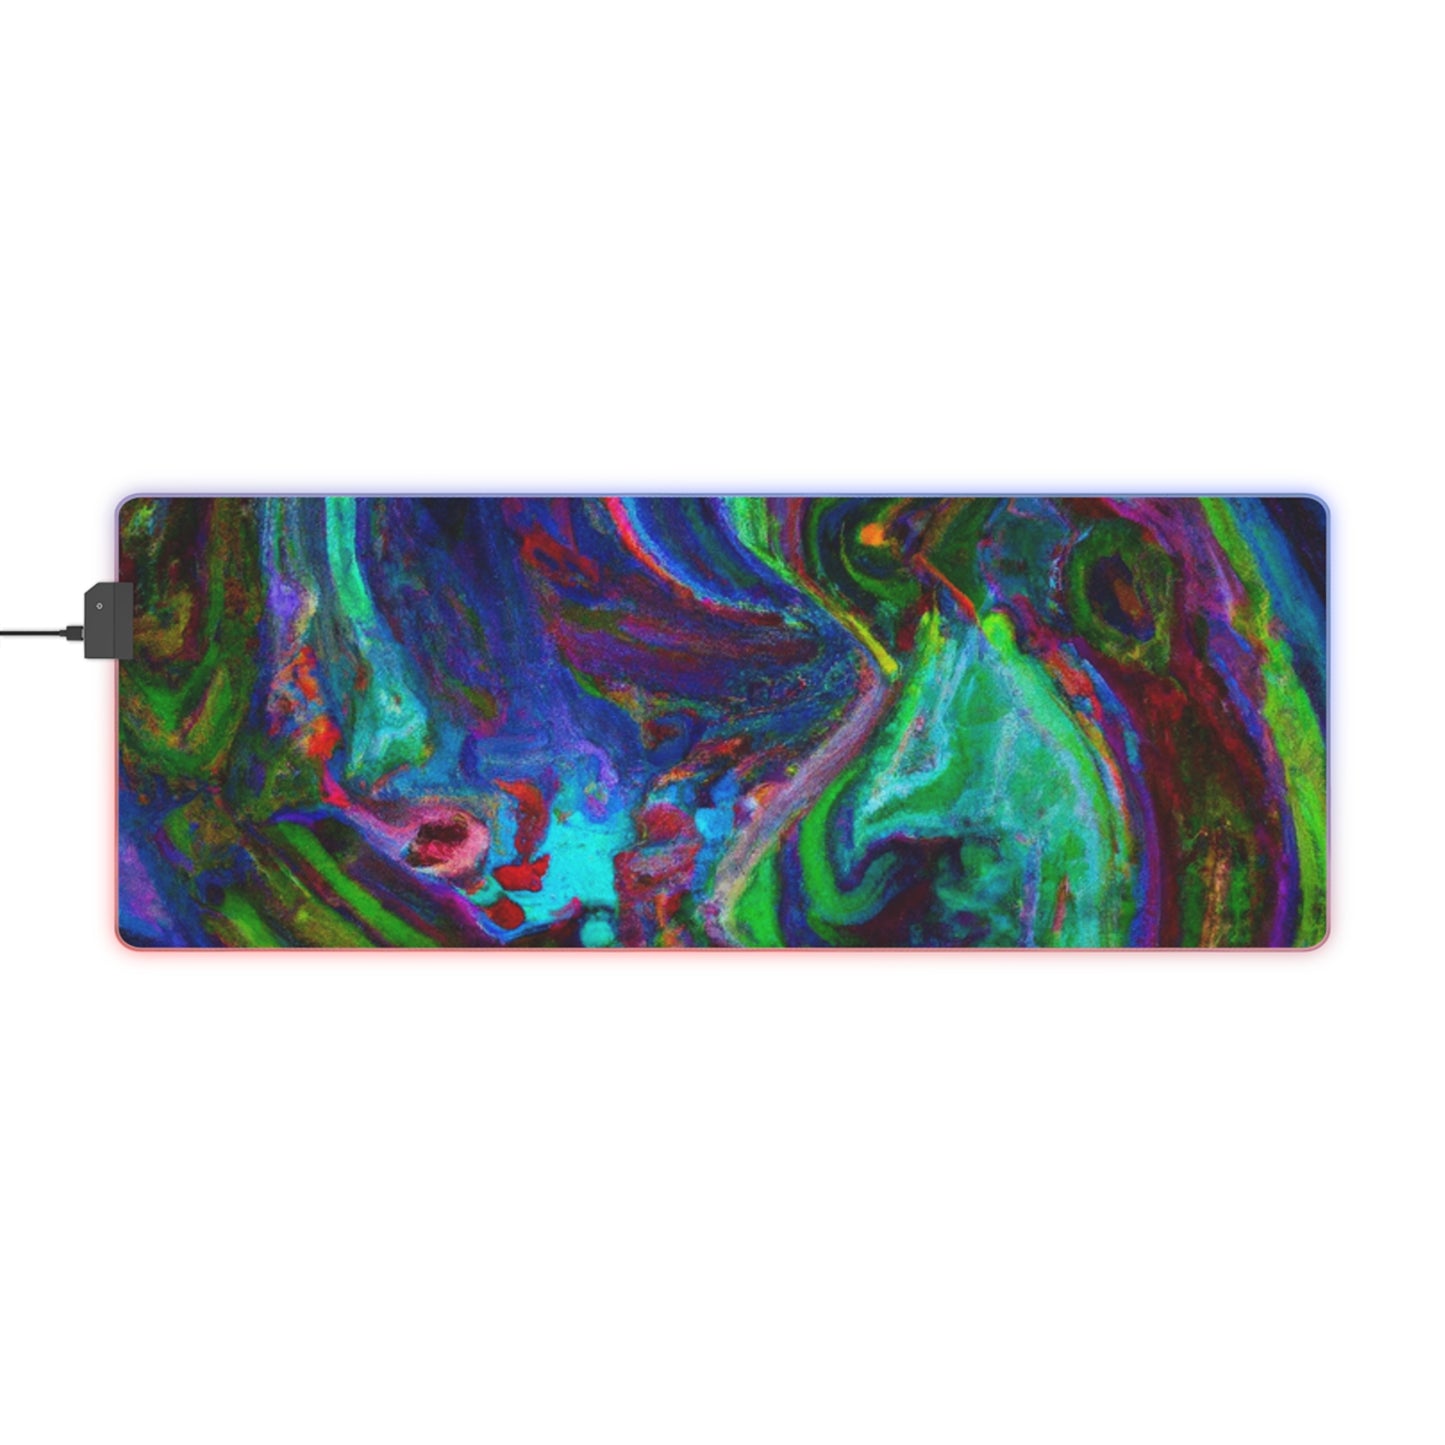 "Dale Dynamo" - Psychedelic Trippy LED Light Up Gaming Mouse Pad